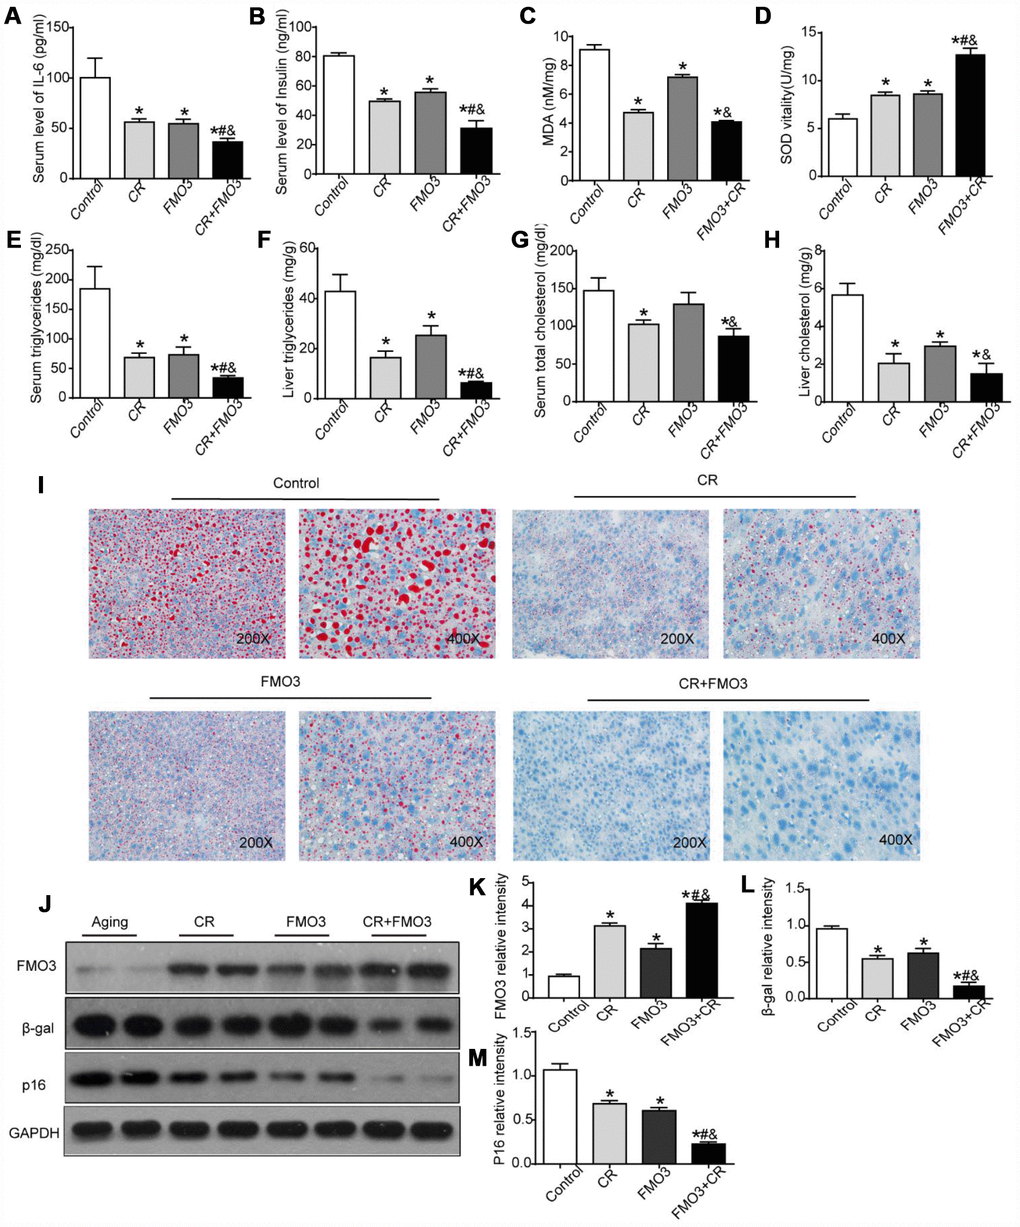 Overexpression of FMO3 alleviates age-related alterations in aging liver. Levels of (A) IL-6 and (B) insulin in serum were measured by ELISA. Levels of (C) SOD, (D) MDA, (E) serum TG, (F) liver TG, (G) serum TC, and (H) liver TC were measured using commercial kits. (I) Lipid droplet accumulation was assessed via Oil Red O staining. (J) Western blotting was used to determine levels of (K) FMO3, (L) β-gal, and (M) p16. Results are shown as the mean ± SD of eight animals per group. *p #p &p 